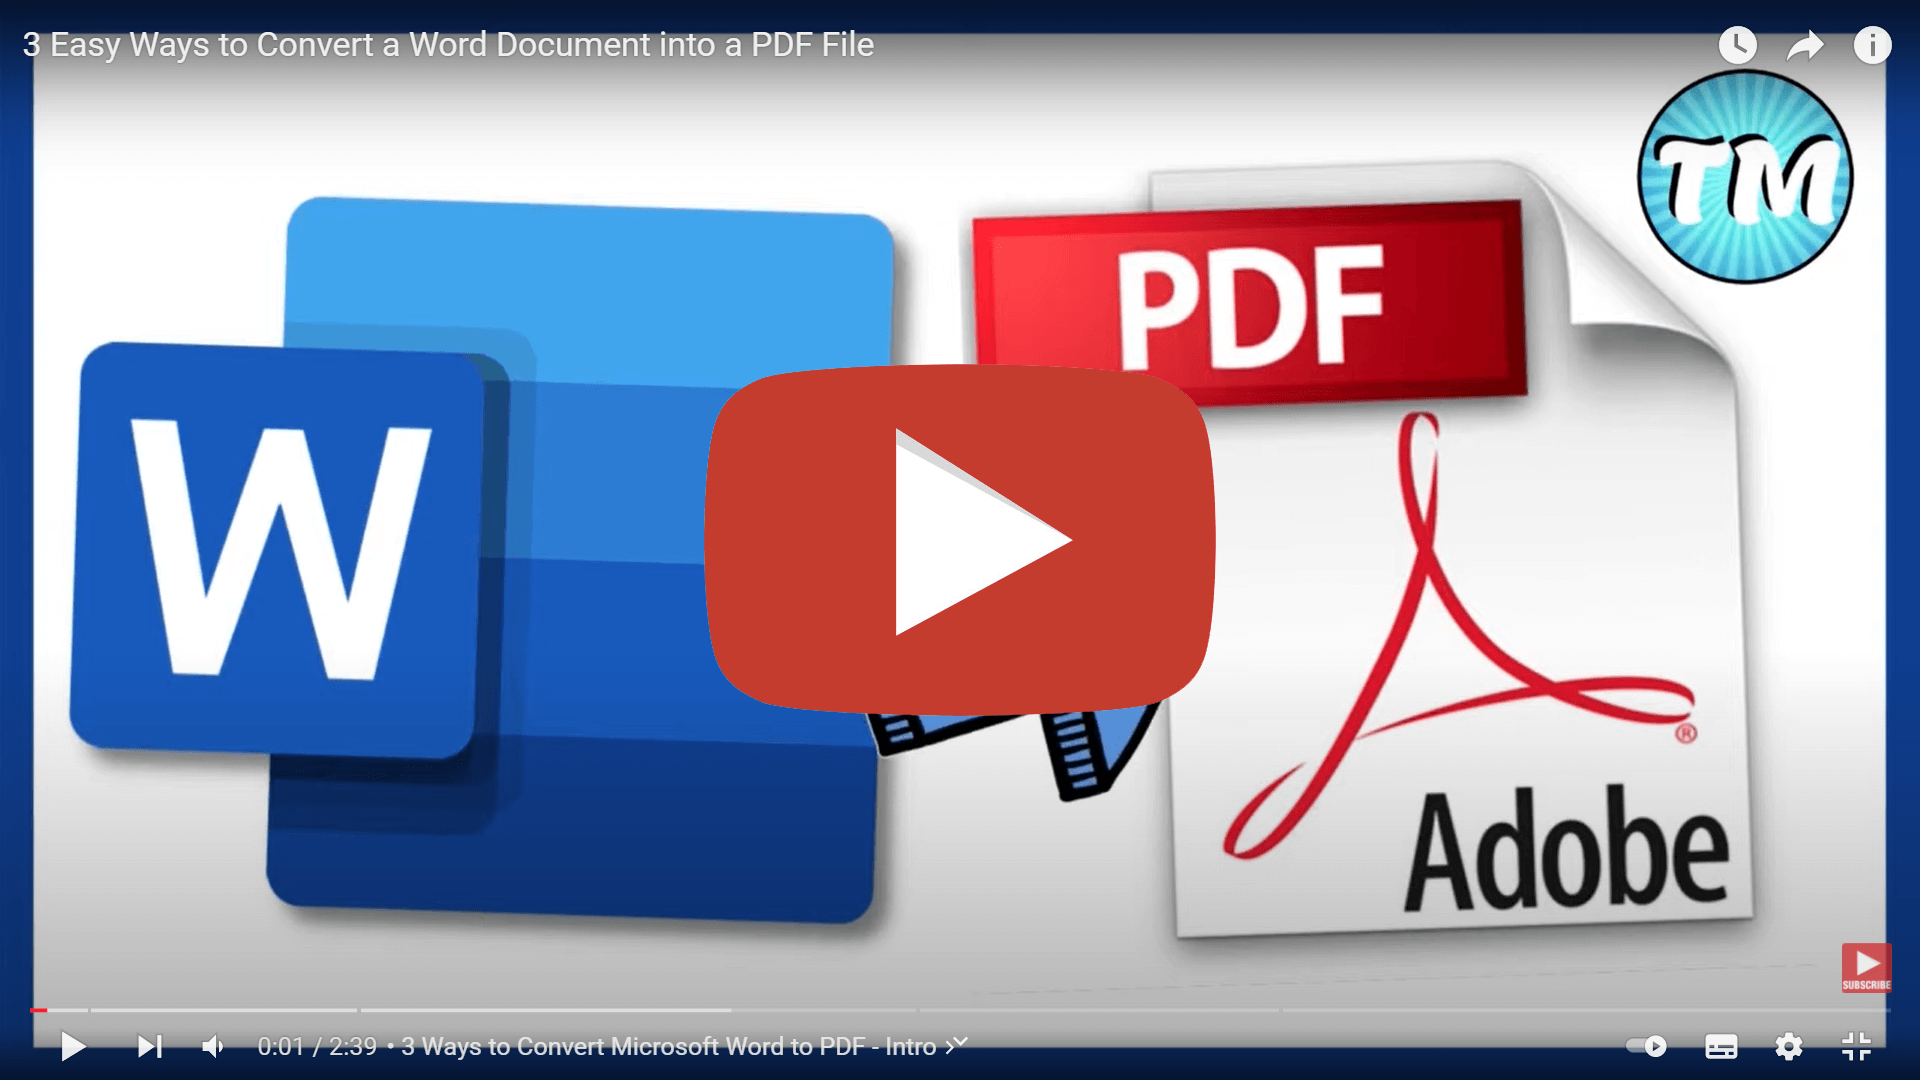 Convert a Word Document into a PDF File